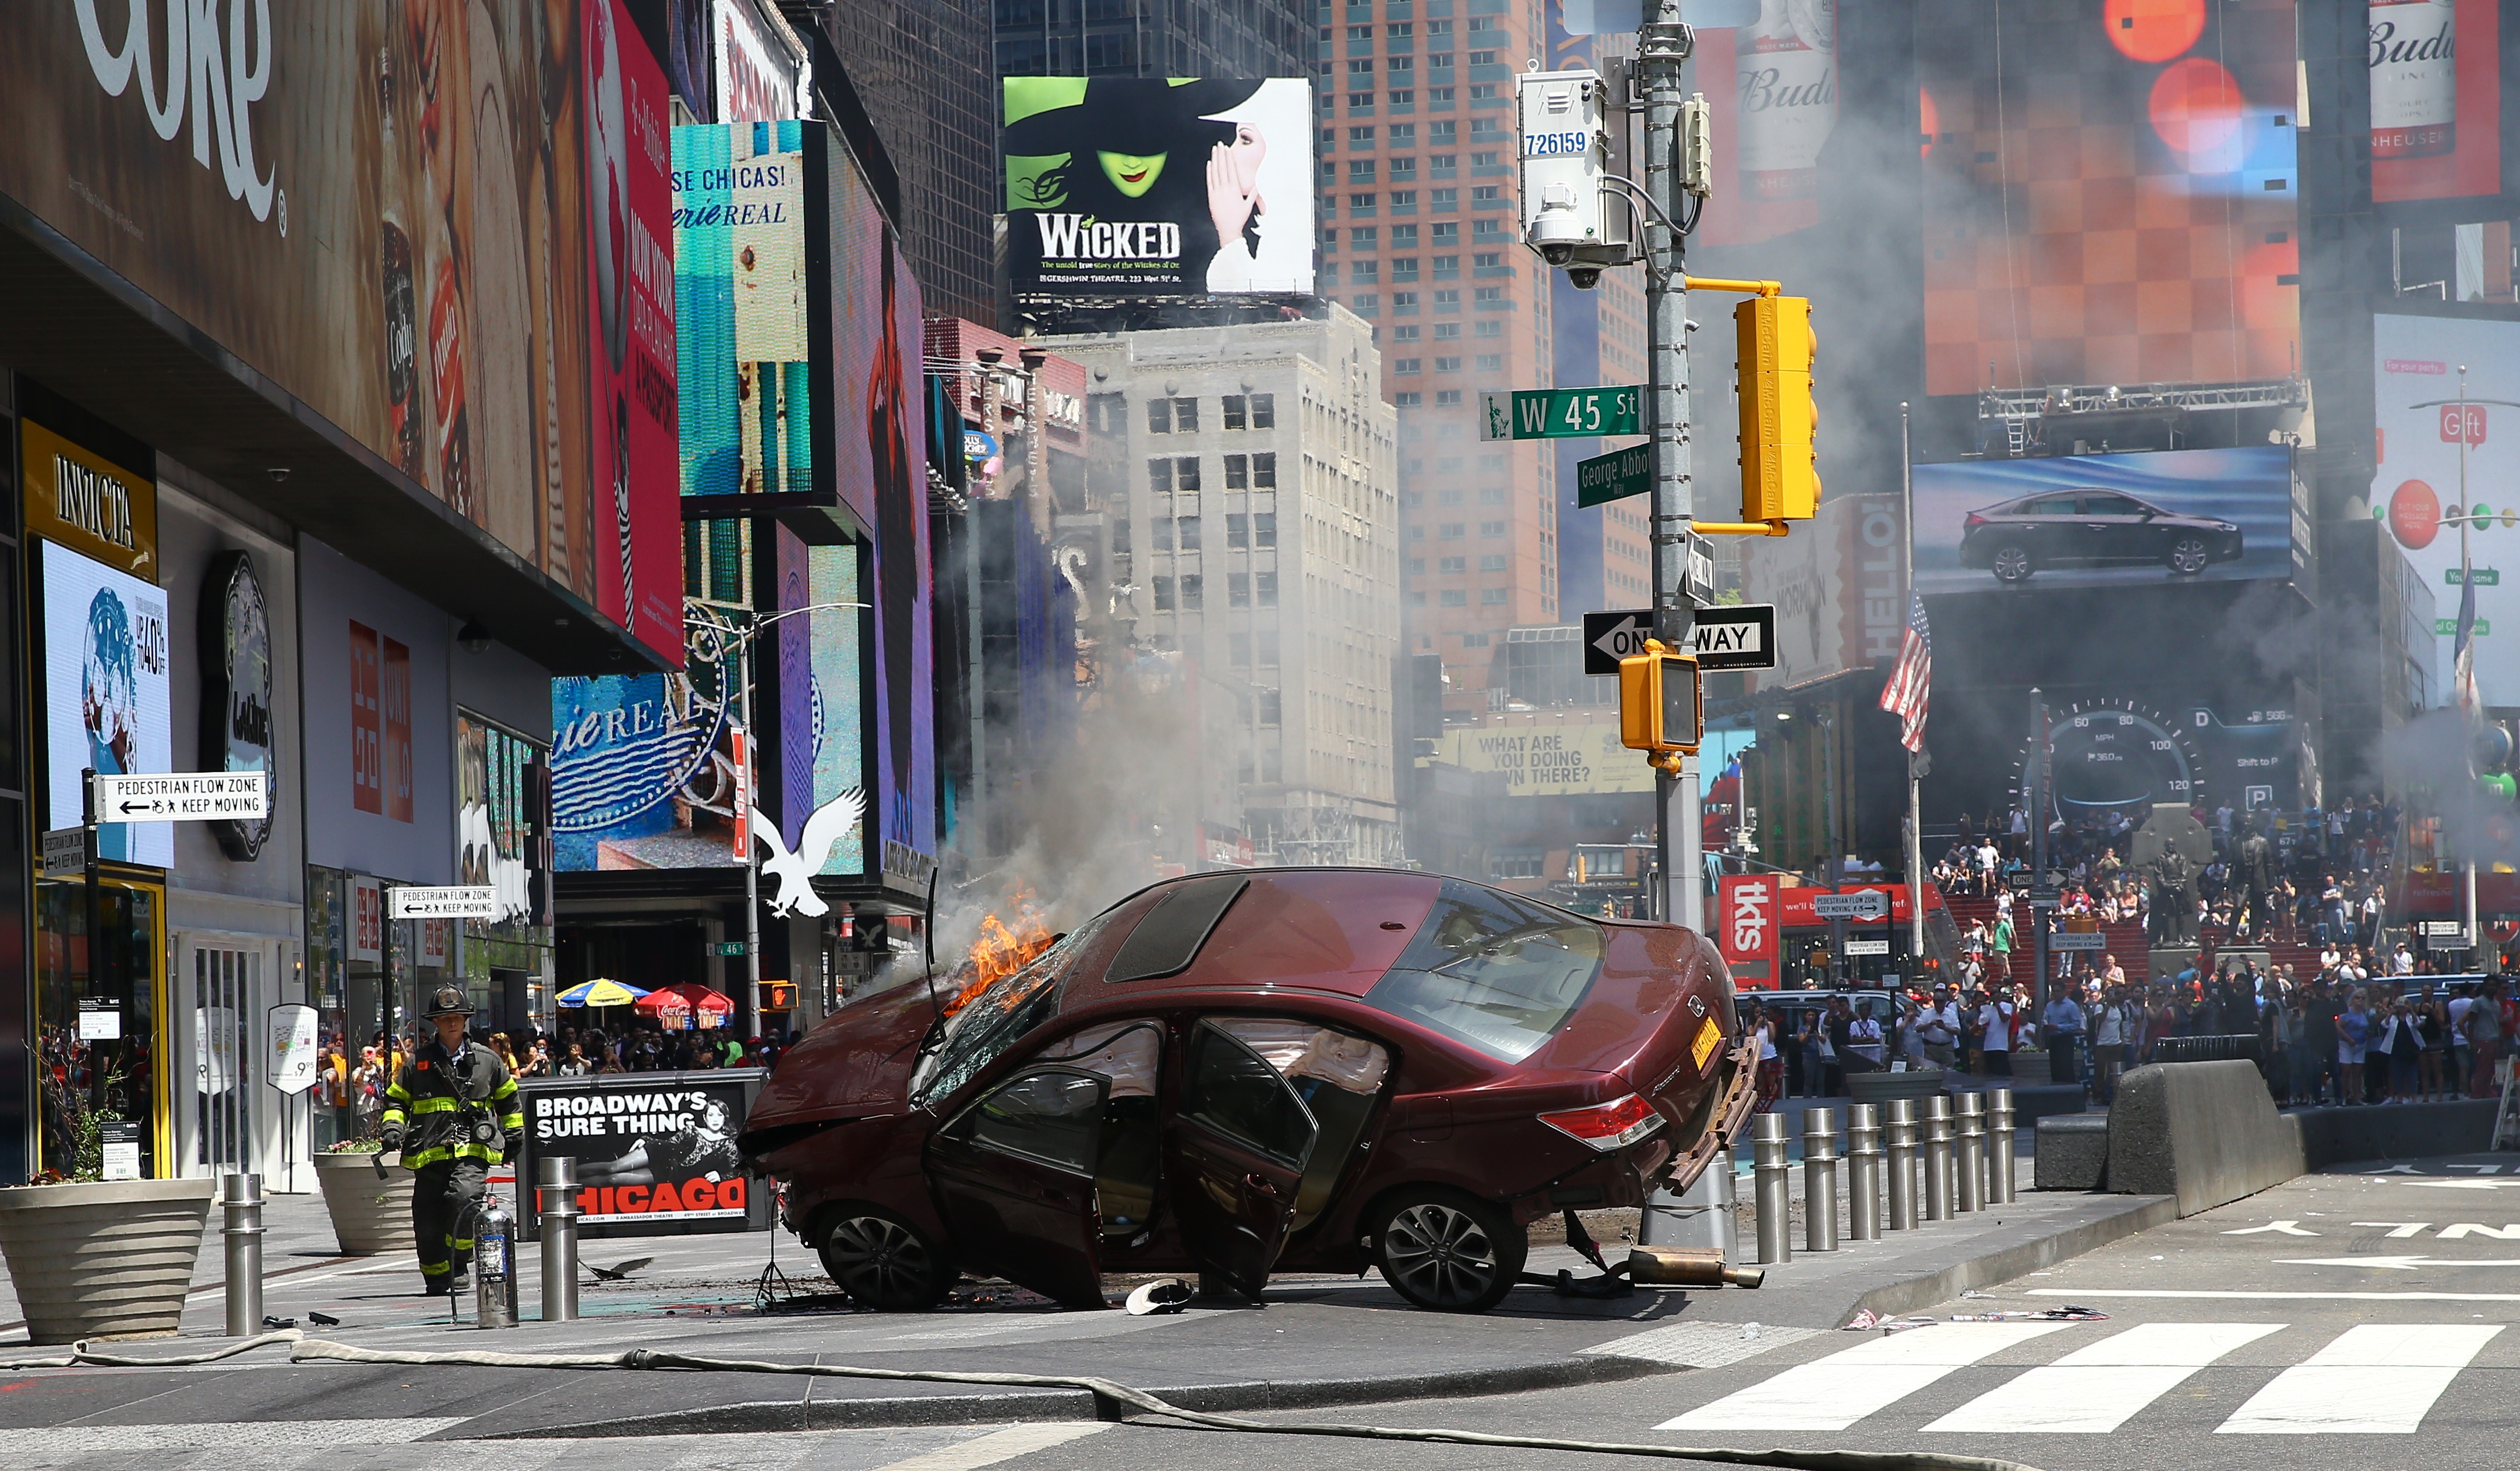 Flames and smoke rise from a wrecked vehicle after it plowed into pedestrians on a busy sidewalk on the corner of West 45th St. and Broadway at Times Square in New York on May 18, 2017. (Volkan Furuncu—Anadolu Agency/Getty Images)